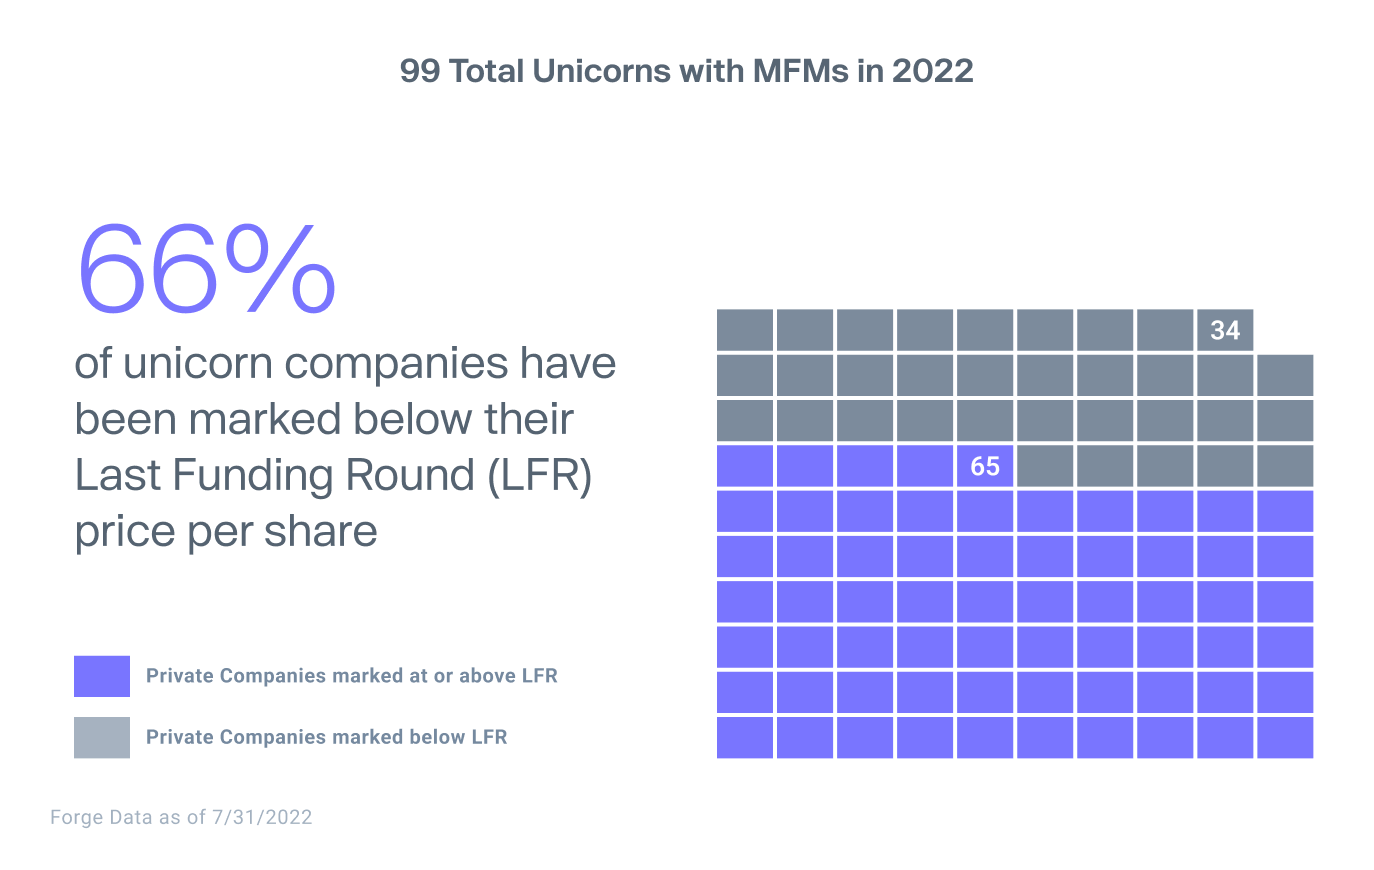 Chart shows that 66% of unicorns have been marked below their last funding round price per share